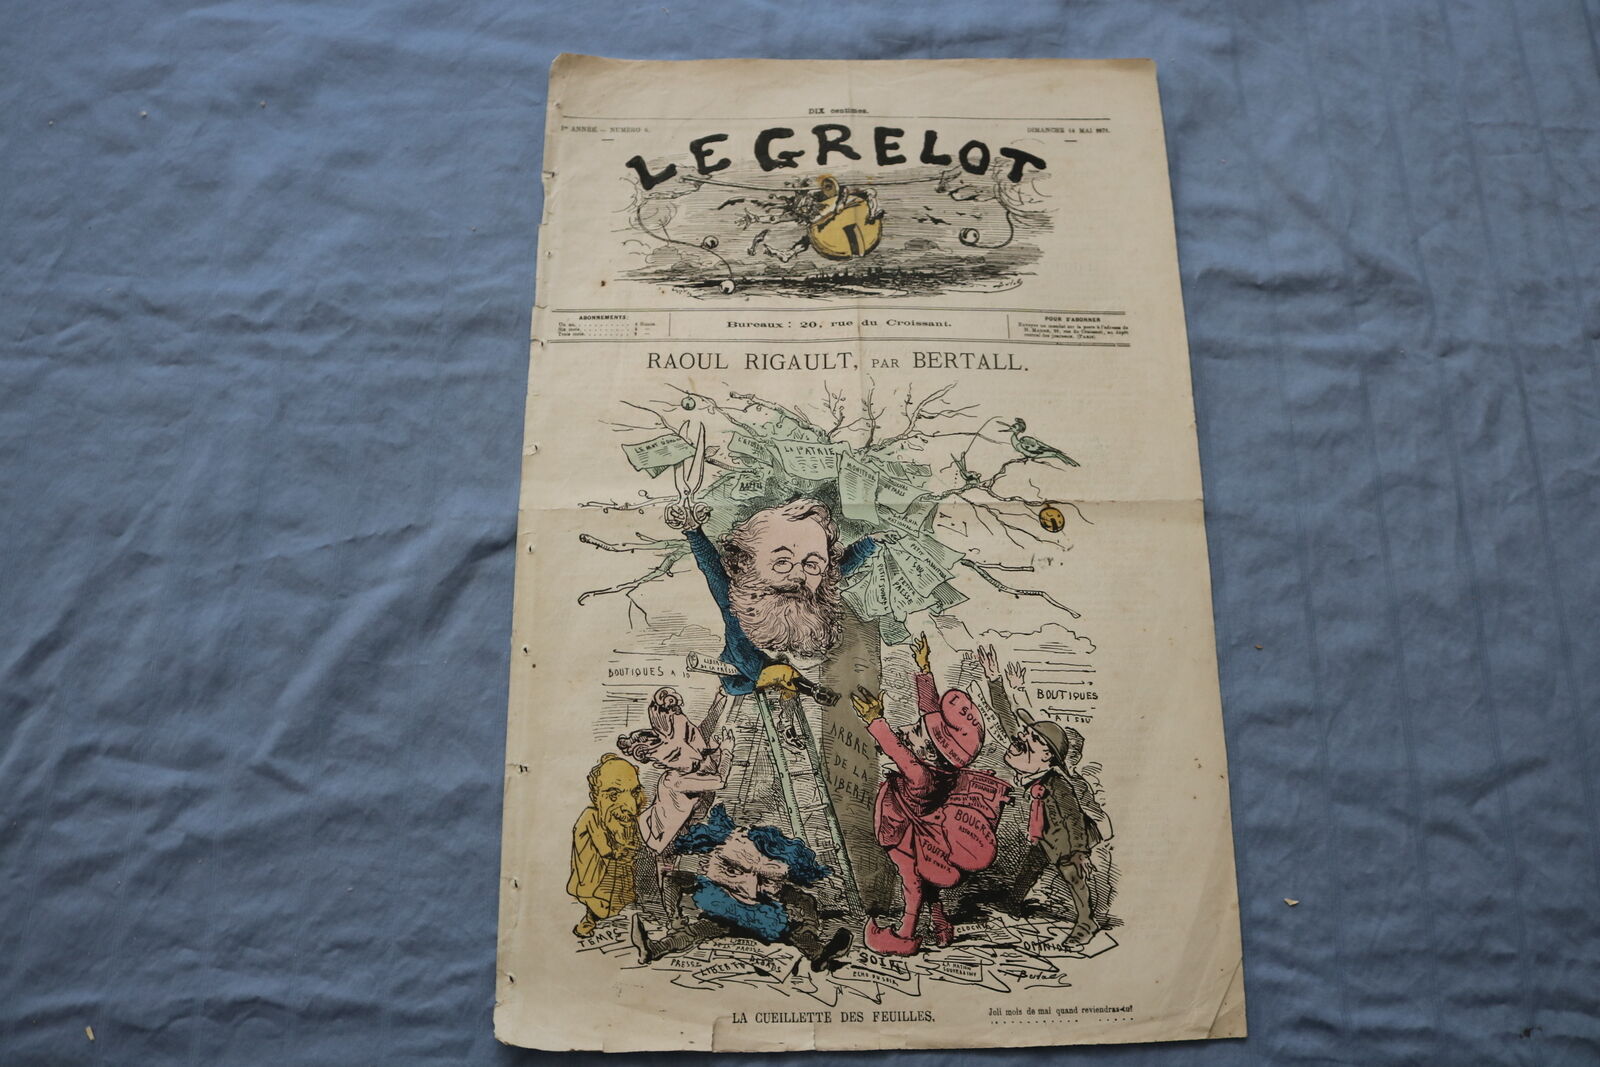 1871 MAY 14 LE GRELOT NEWSPAPER - RAOUL RIGAULT, PAR BERTALL - FRENCH - NP 8462